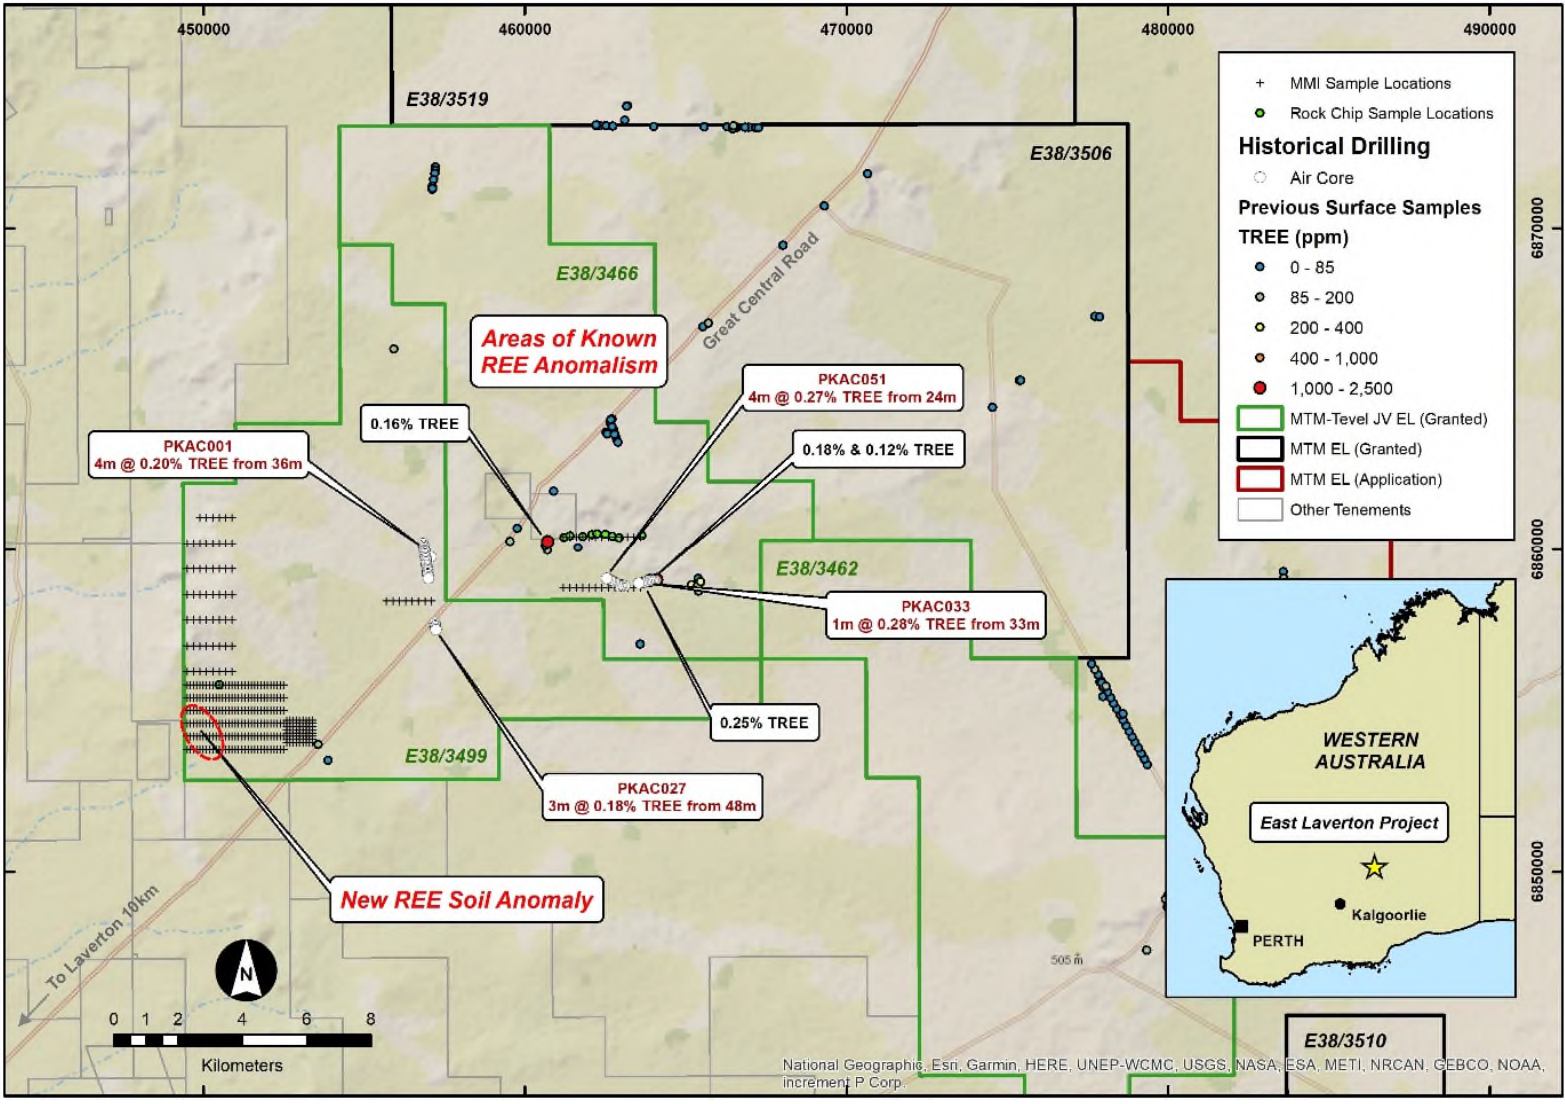 (Source: Mt Monger Resources) Map detailing the location of targets on-site the separate East Laverton REE project 